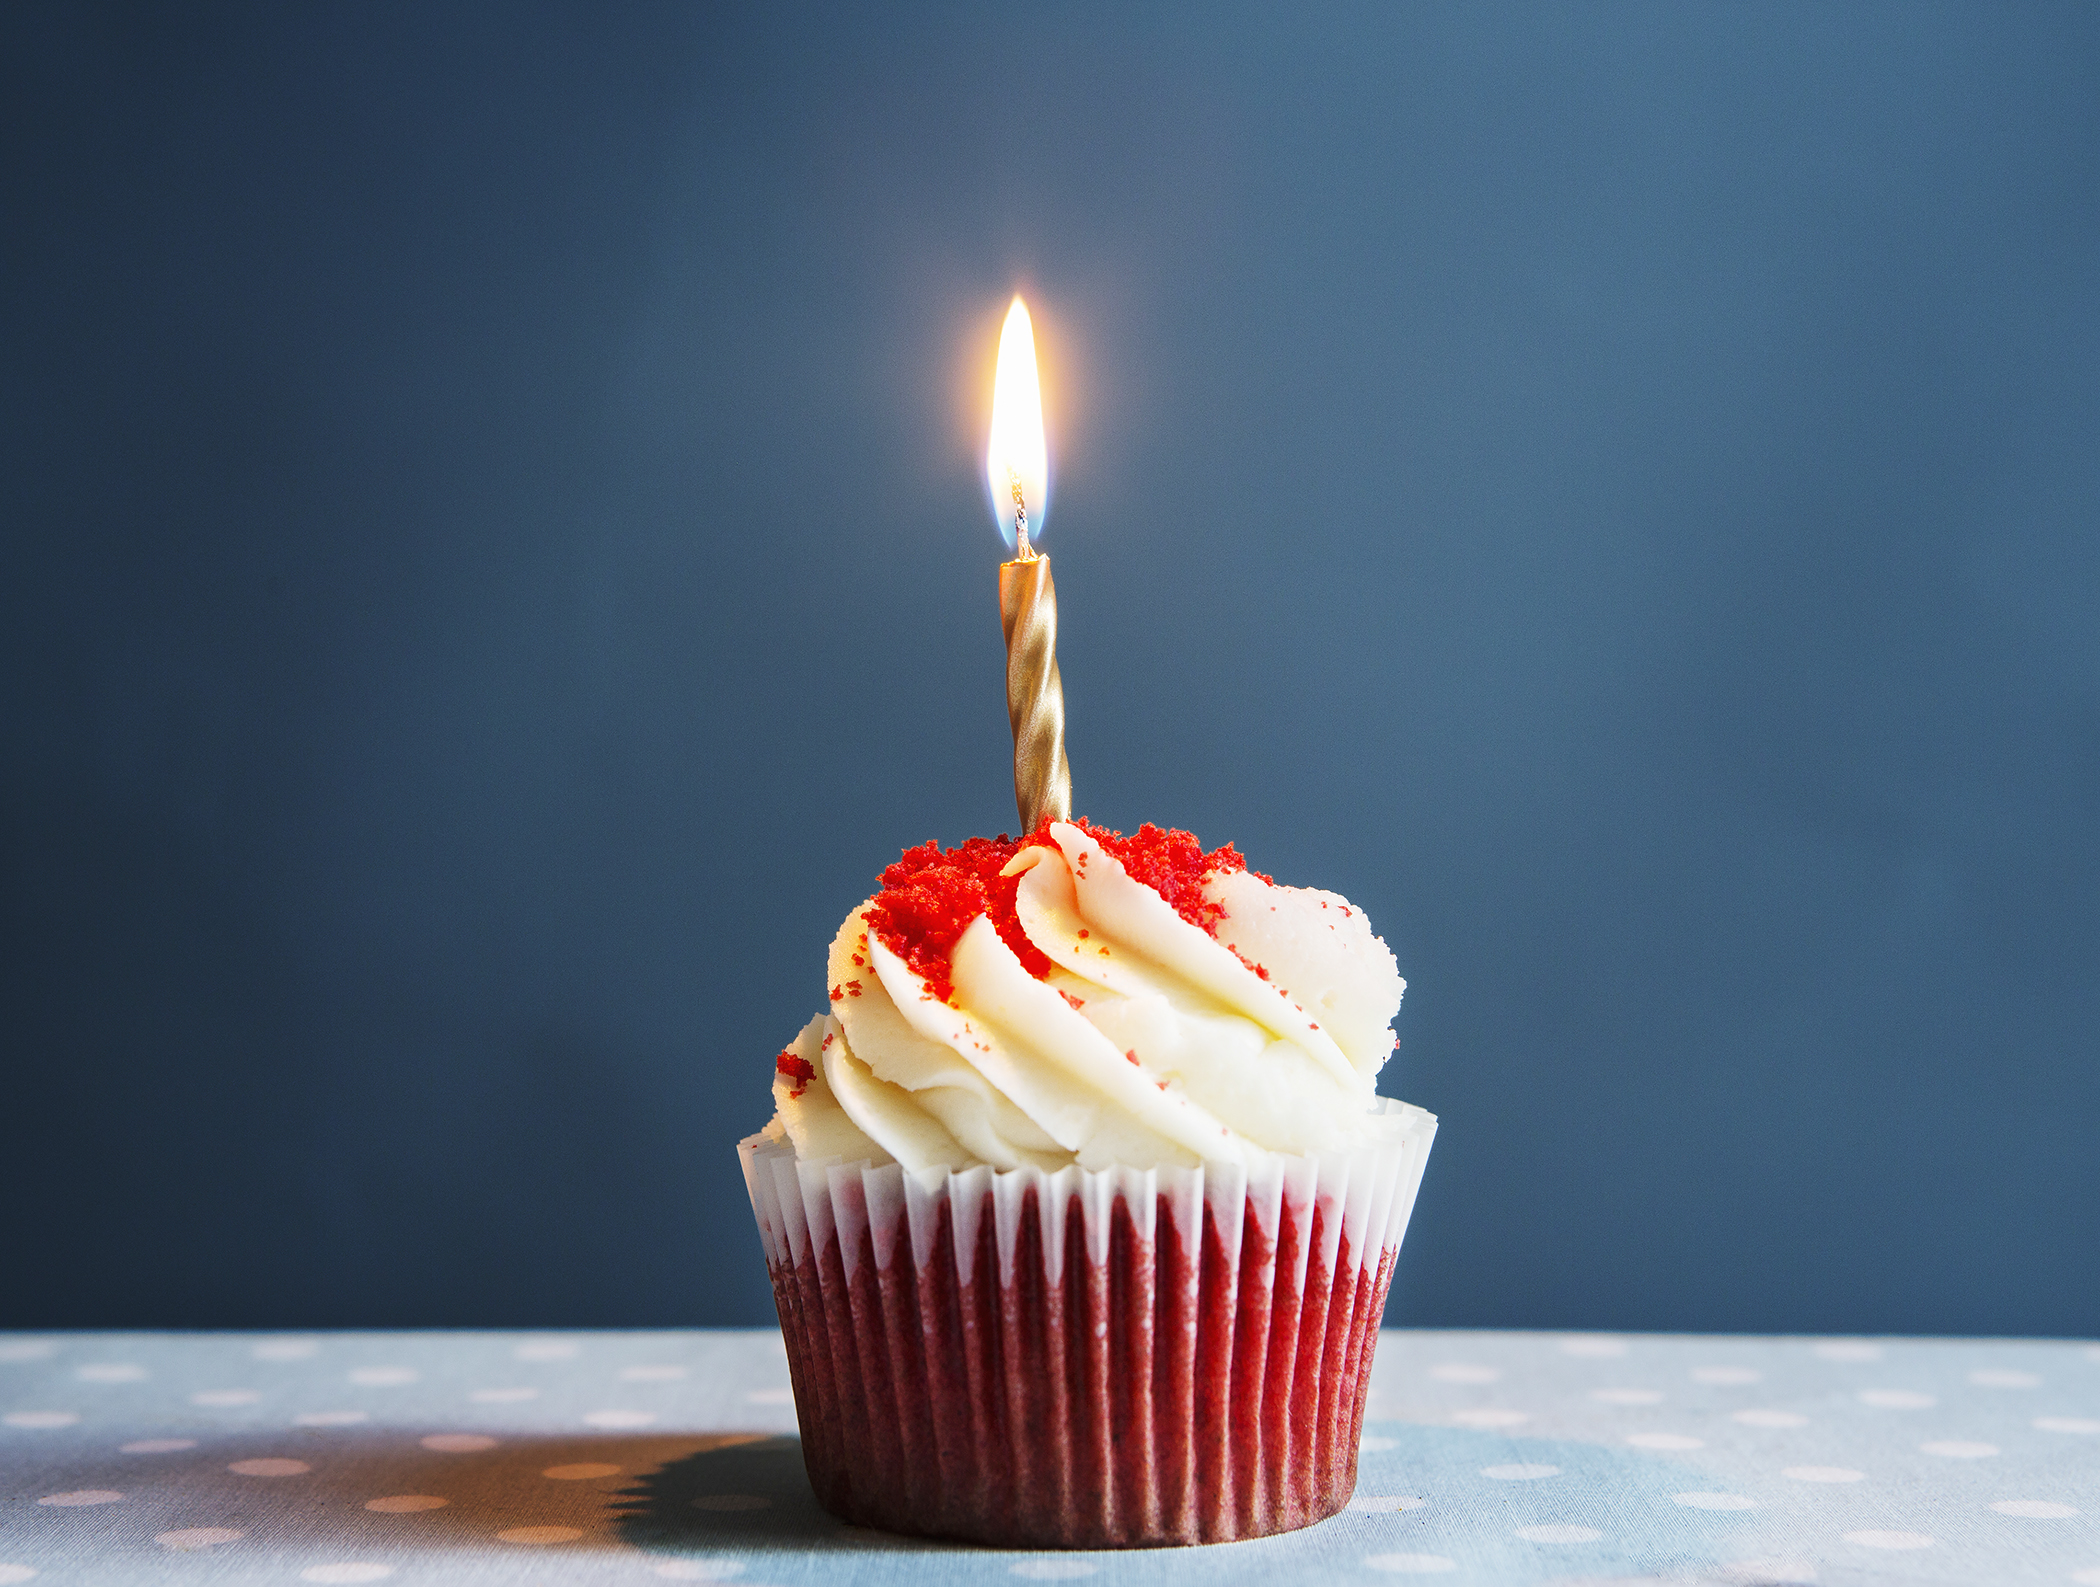 Is a Roth IRA Conversion Allowed When a Retiree Is Turning 70½?